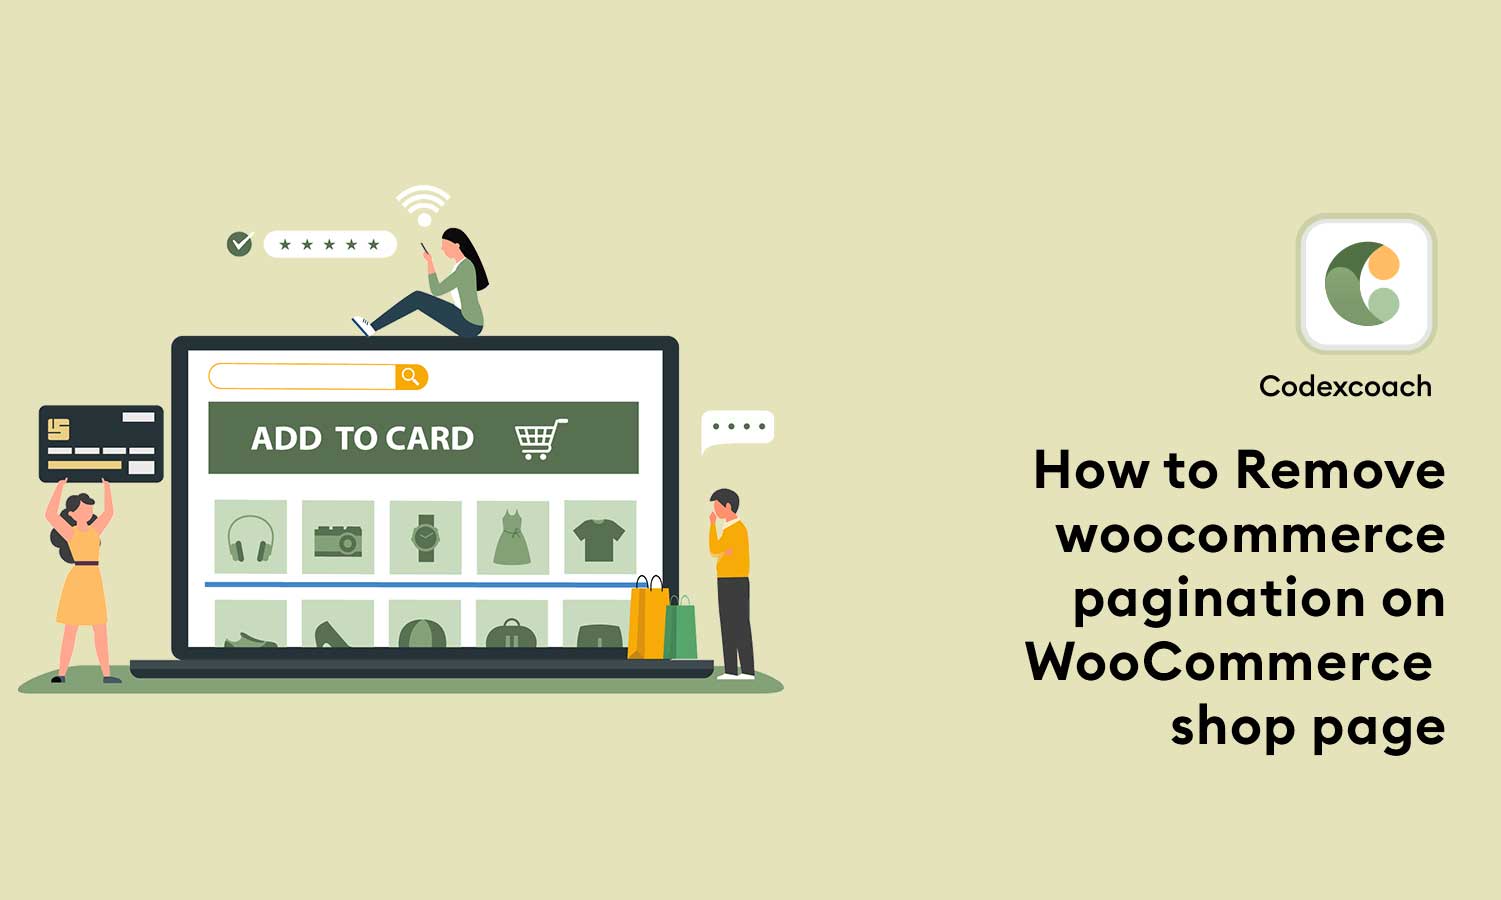 How to Remove woocommerce pagination on WooCommerce shop page